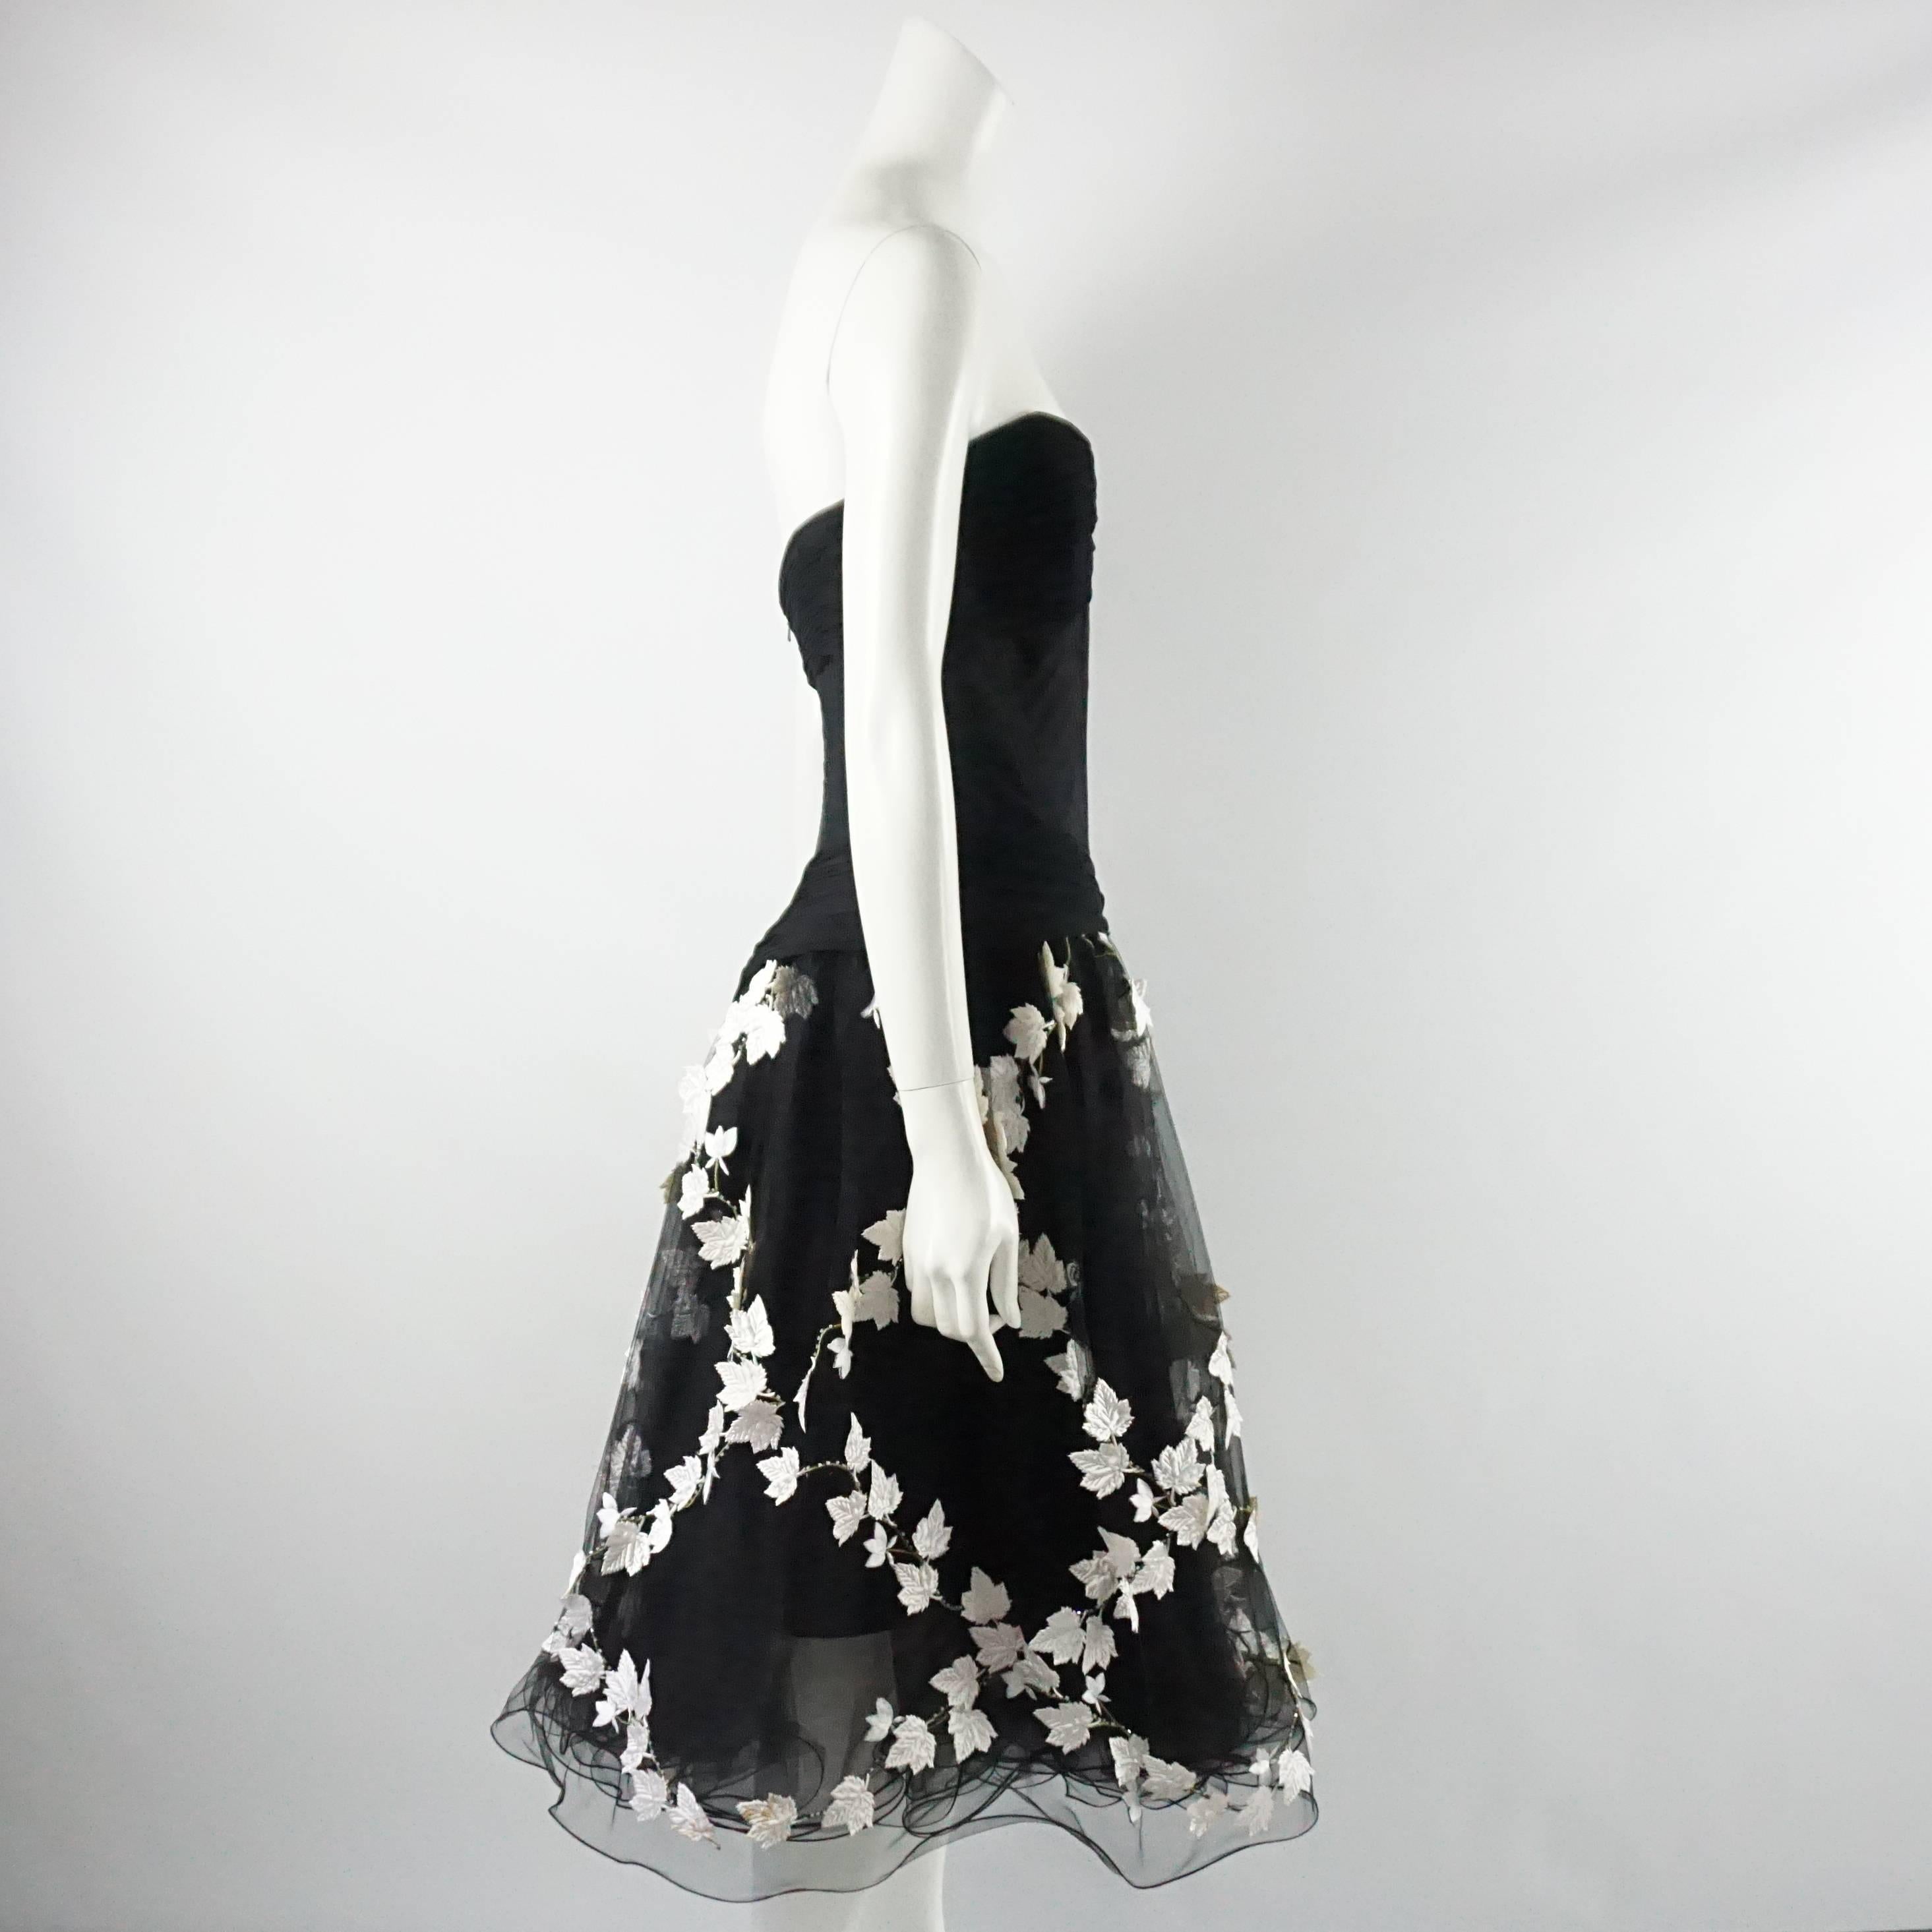 This Vicky Tiel dress looks fantastic on. The bodice is made of mesh and has boning with a back zipper closure. The skirt has layers of tulle with white leaf appliqués and sequin detailing. It is in excellent vintage condition with minimal wear.